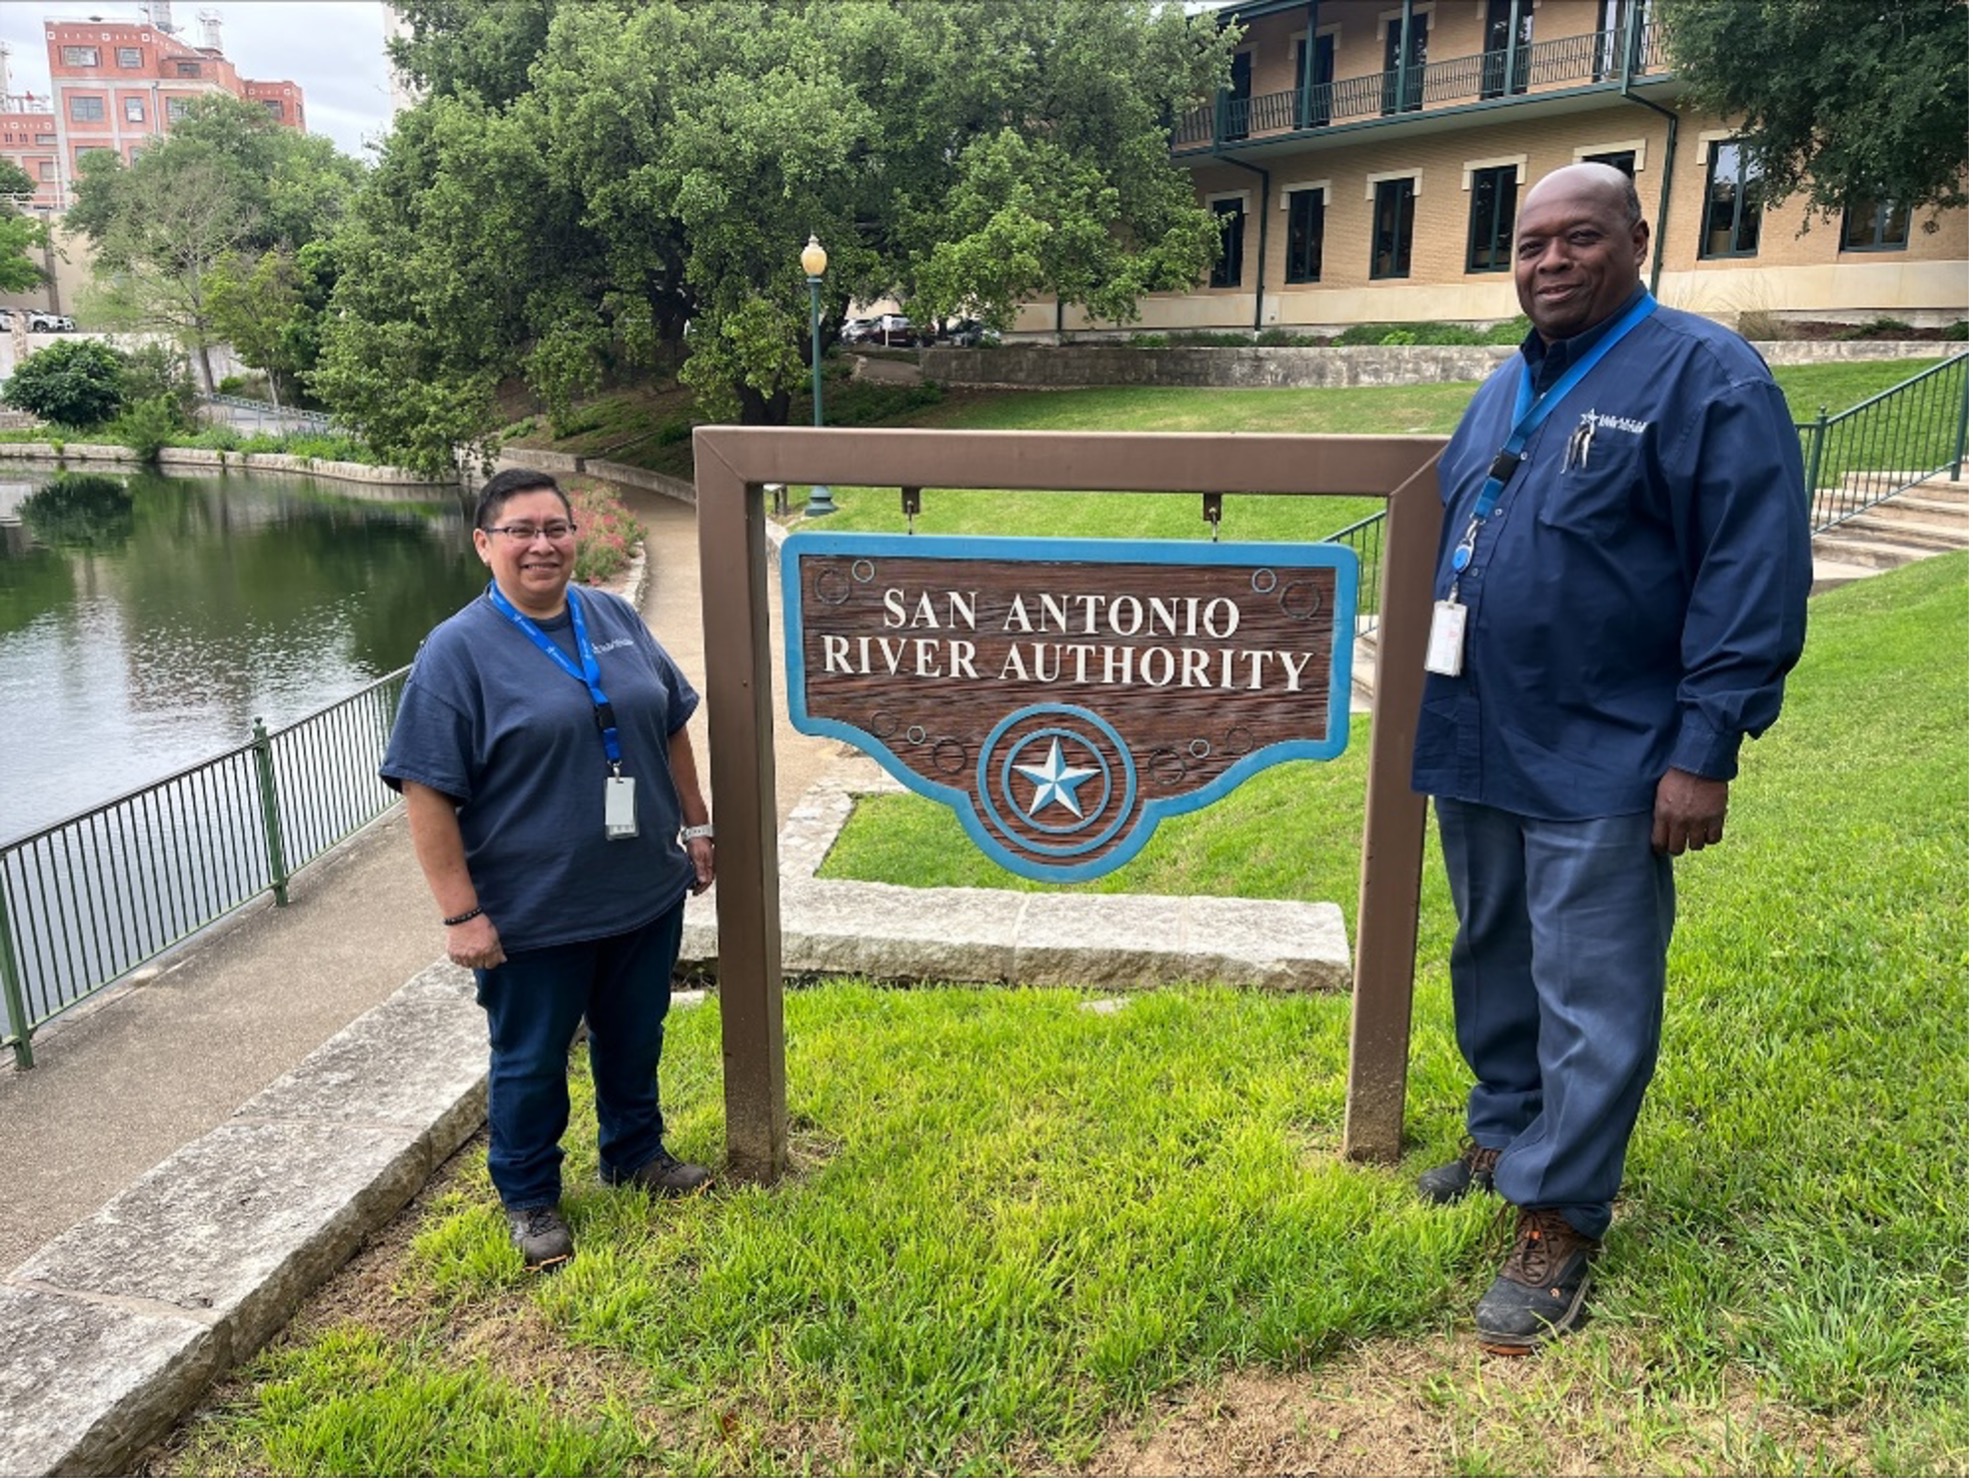 A man and woman pose next to San Antonio River Authority sign